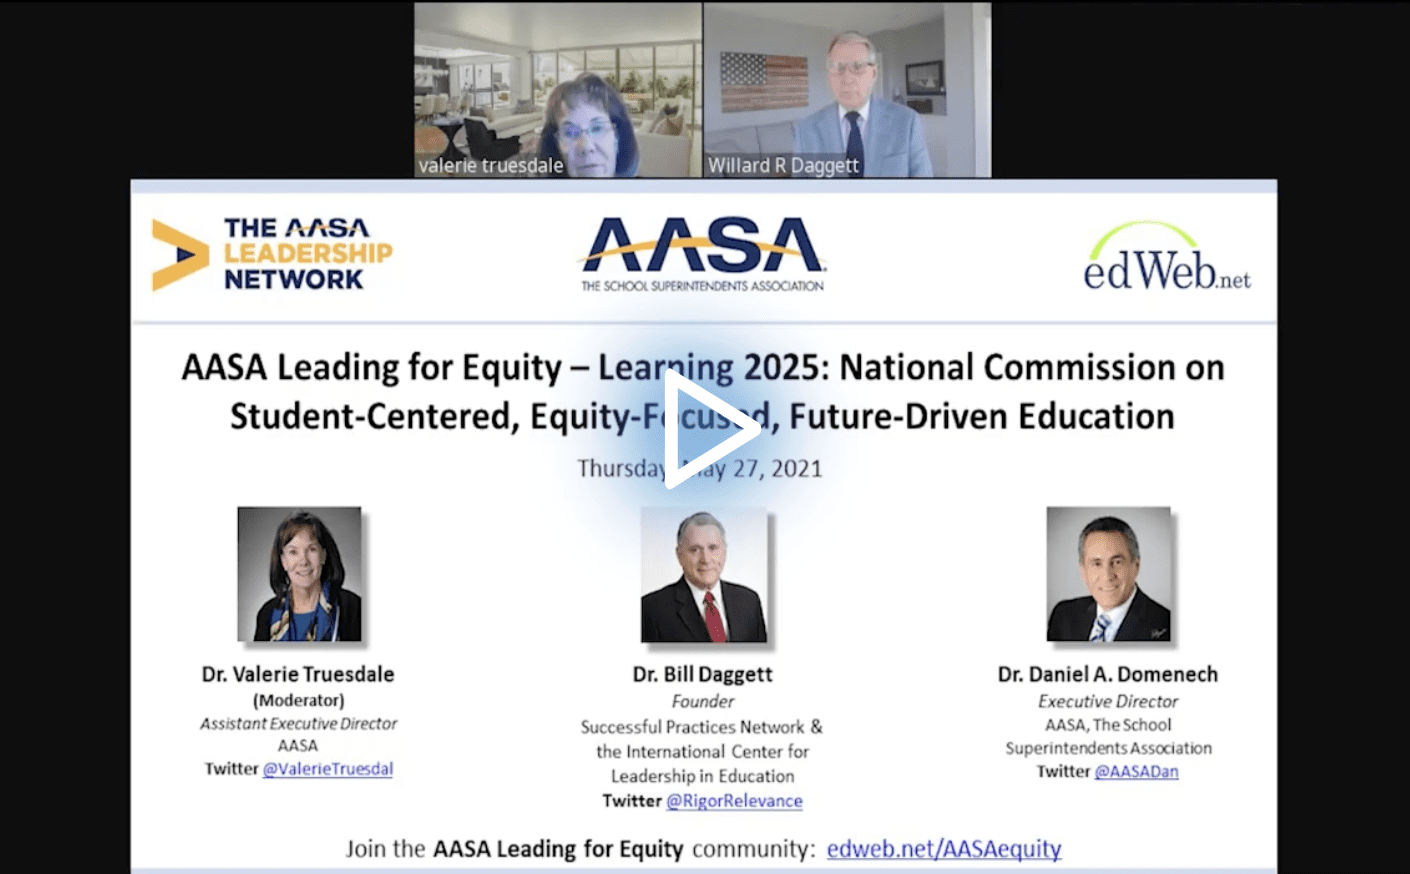 AASA Leading for Equity – Learning 2025: National Commission on Student-Centered, Equity-Focused, Future-Driven Education edWebinar recording link